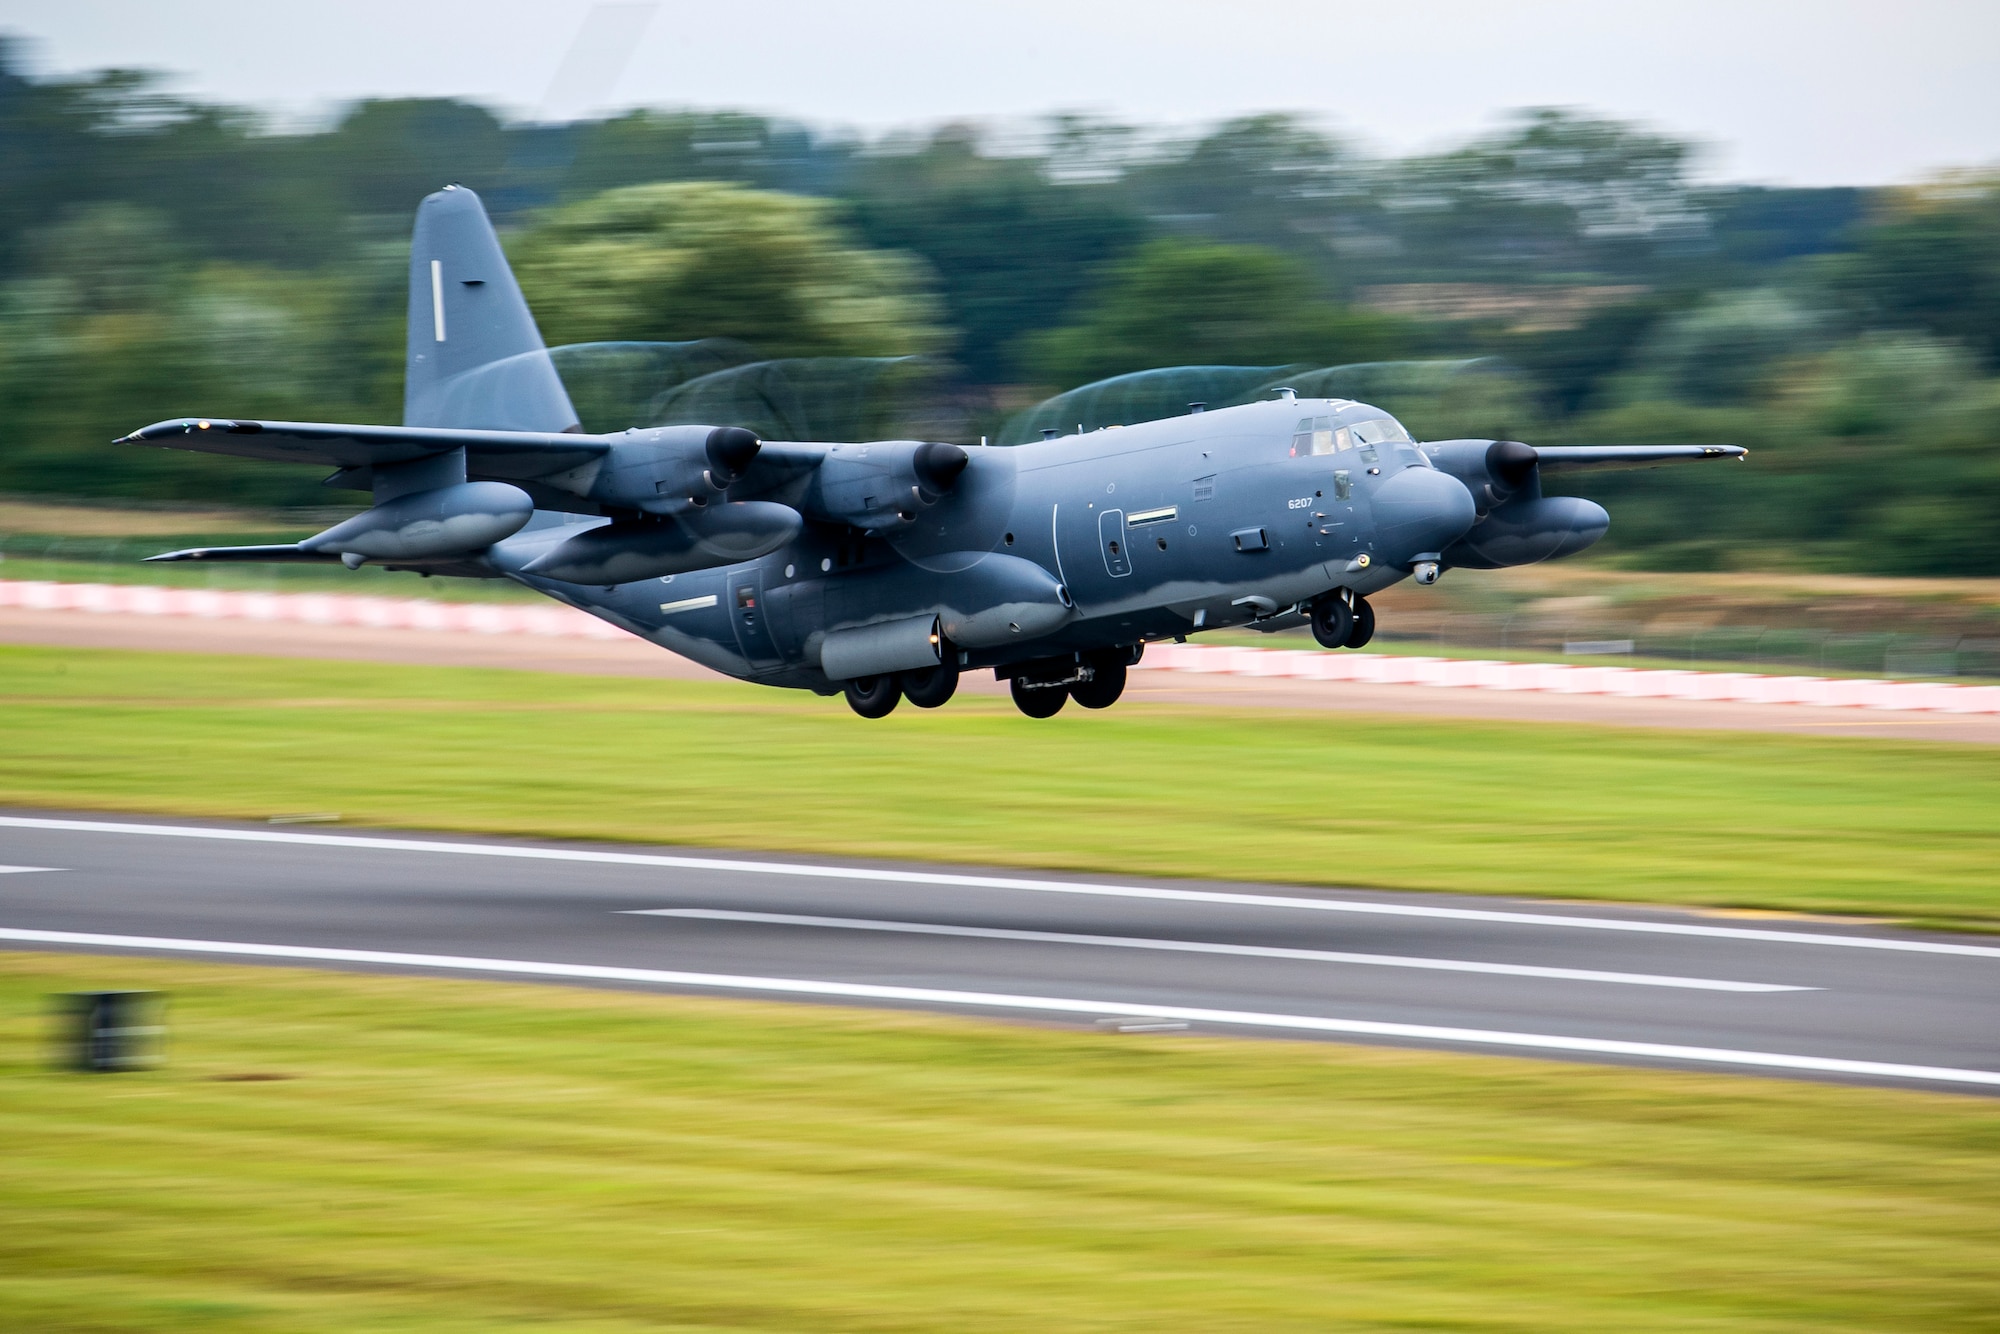 An MC-130J Commando II assigned to the 352d Special Operations Wing takes off during an Agile Combat Employment exercise at RAF Fairford, England, Sept. 13, 2021. Airmen from the 501st Combat Support Wing, 100th Air Refueling Wing and 352d SOW partnered to conduct an ACE exercise to test their overall readiness and lethality capabilities. The exercise enables U.S. forces in Europe to operate from locations with varying levels of capacity and support. (U.S. Air Force photo by Senior Airman Eugene Oliver)